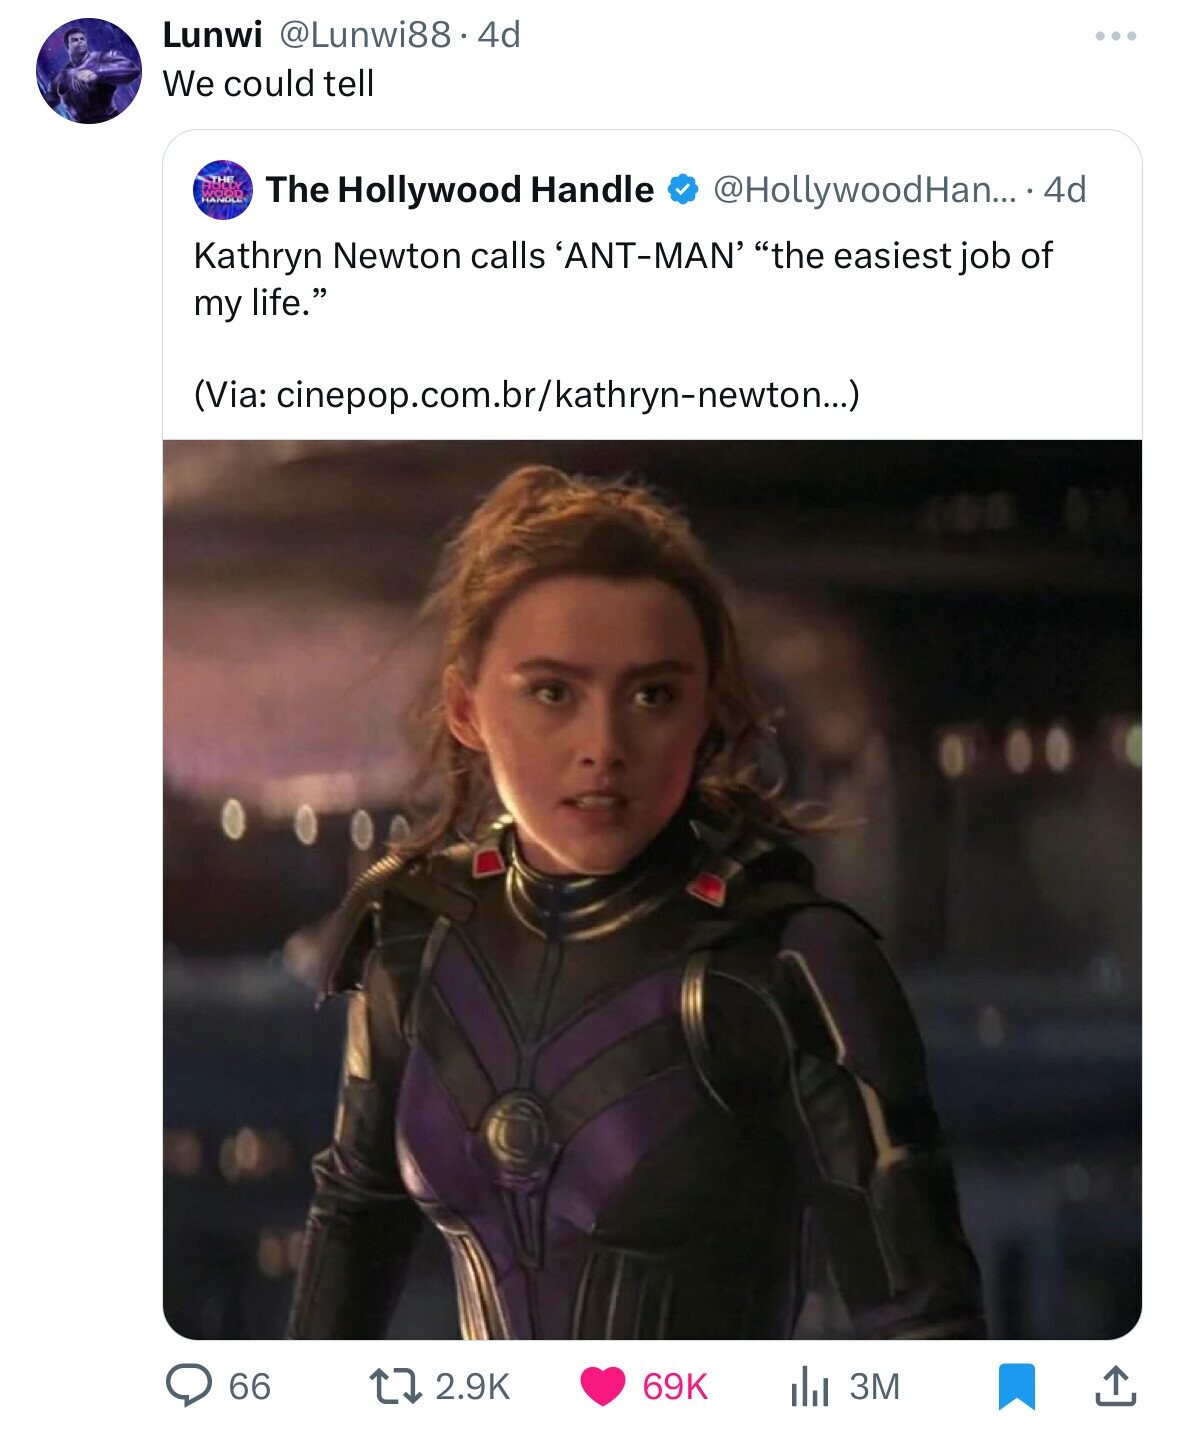 Lunwi @Lunwi88. 4d We could tell The Hollywood Handle @HollywoodHan... 4d Kathryn Newton calls 'ANT-MAN' the easiest job of my life. (Via: cinepop.com.br/kathryn-newton...) 66 2.9K 69K 3M 